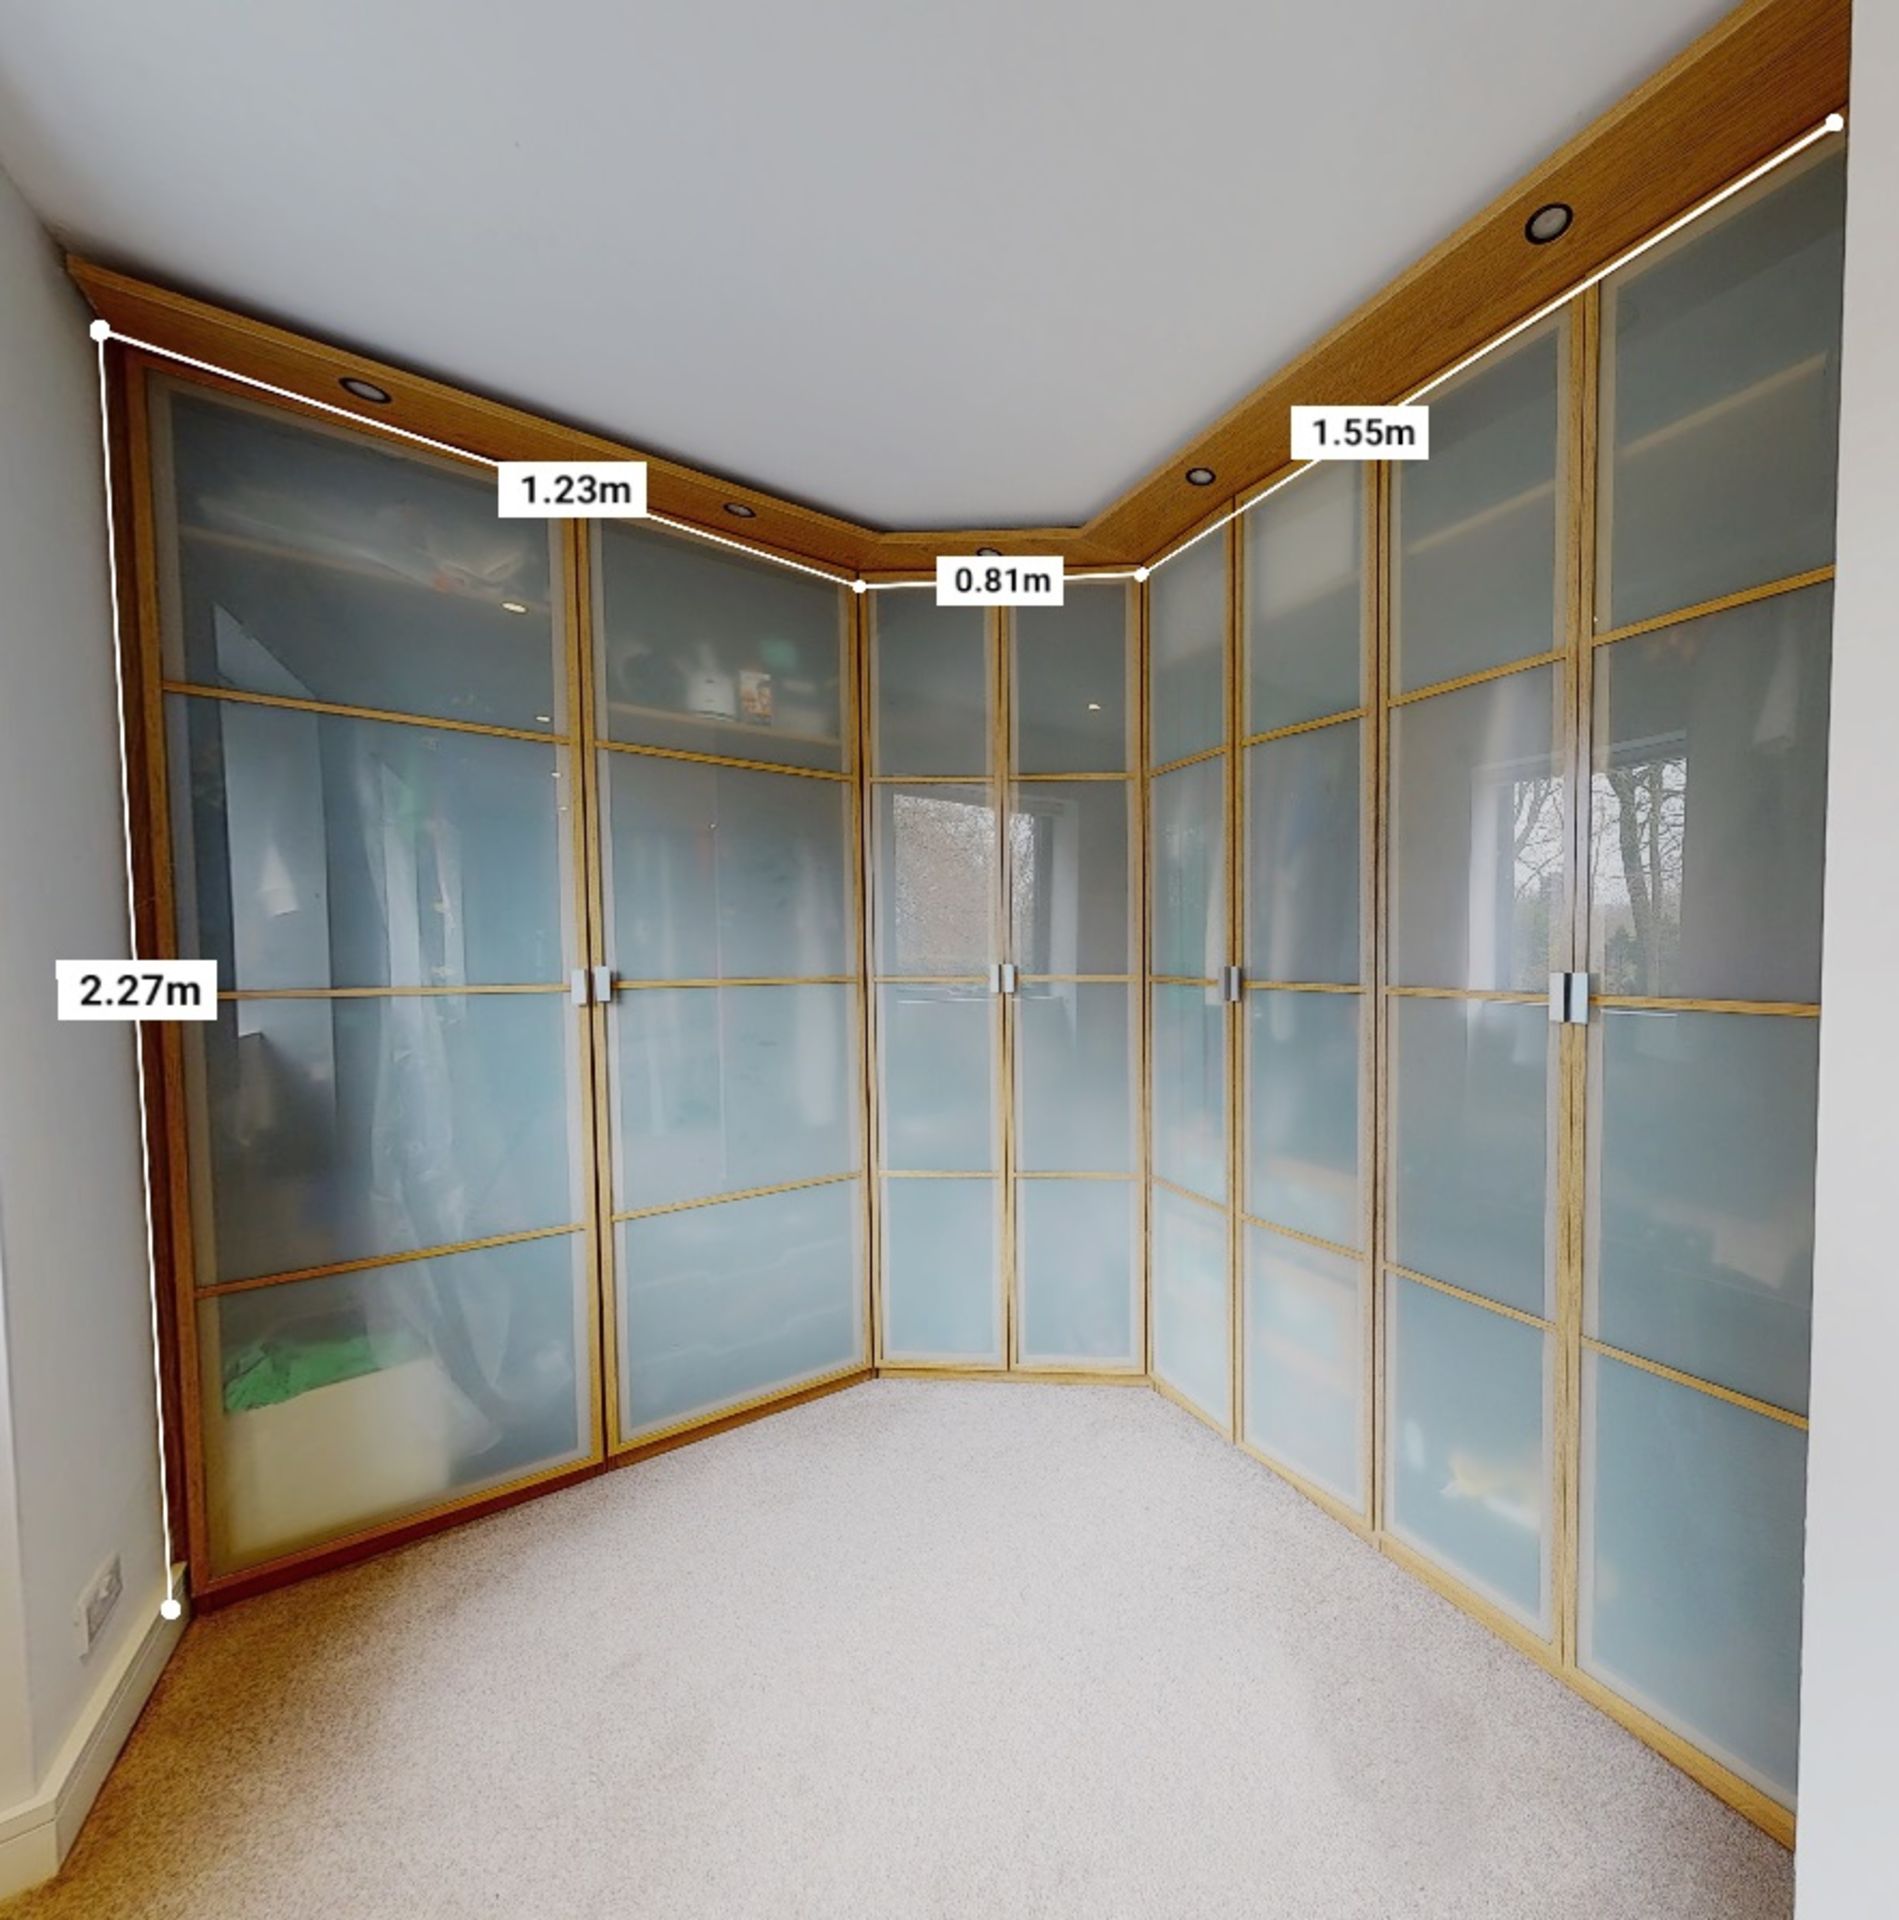 Large Bank Of Bespoke Fitted Master Bedroom Wardrobe Storage With Frosted Glass 8-Door Frontage - - Image 7 of 8